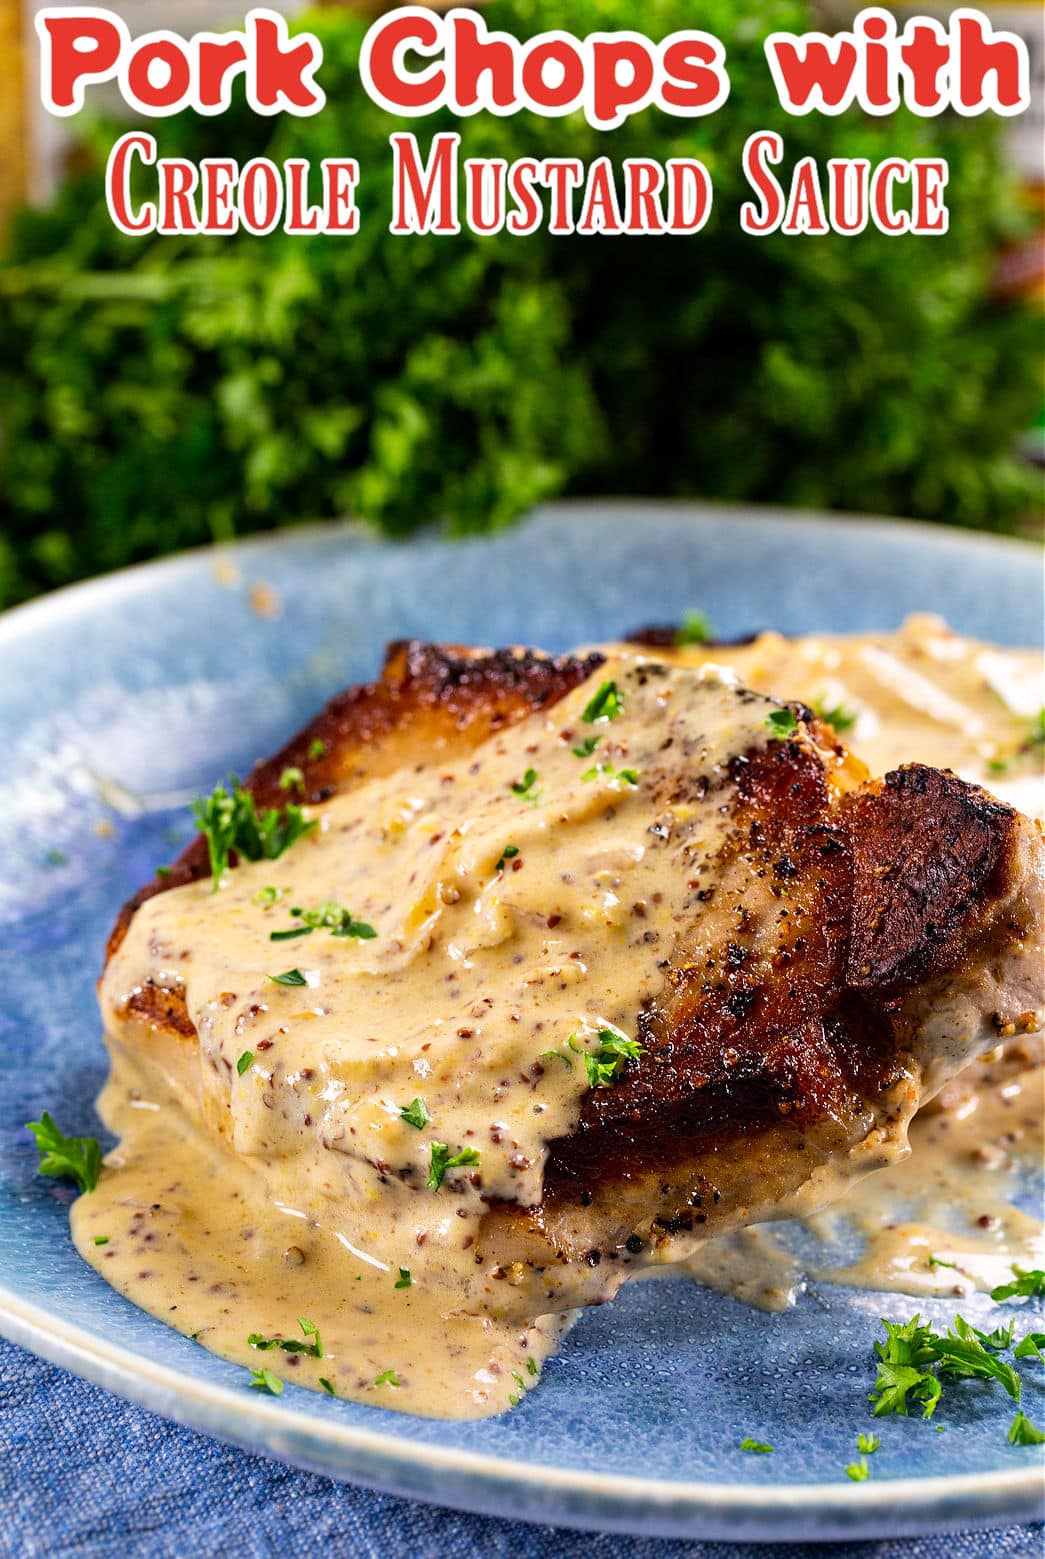 Pork Chops with Creole Mustard Sauce on a plate.